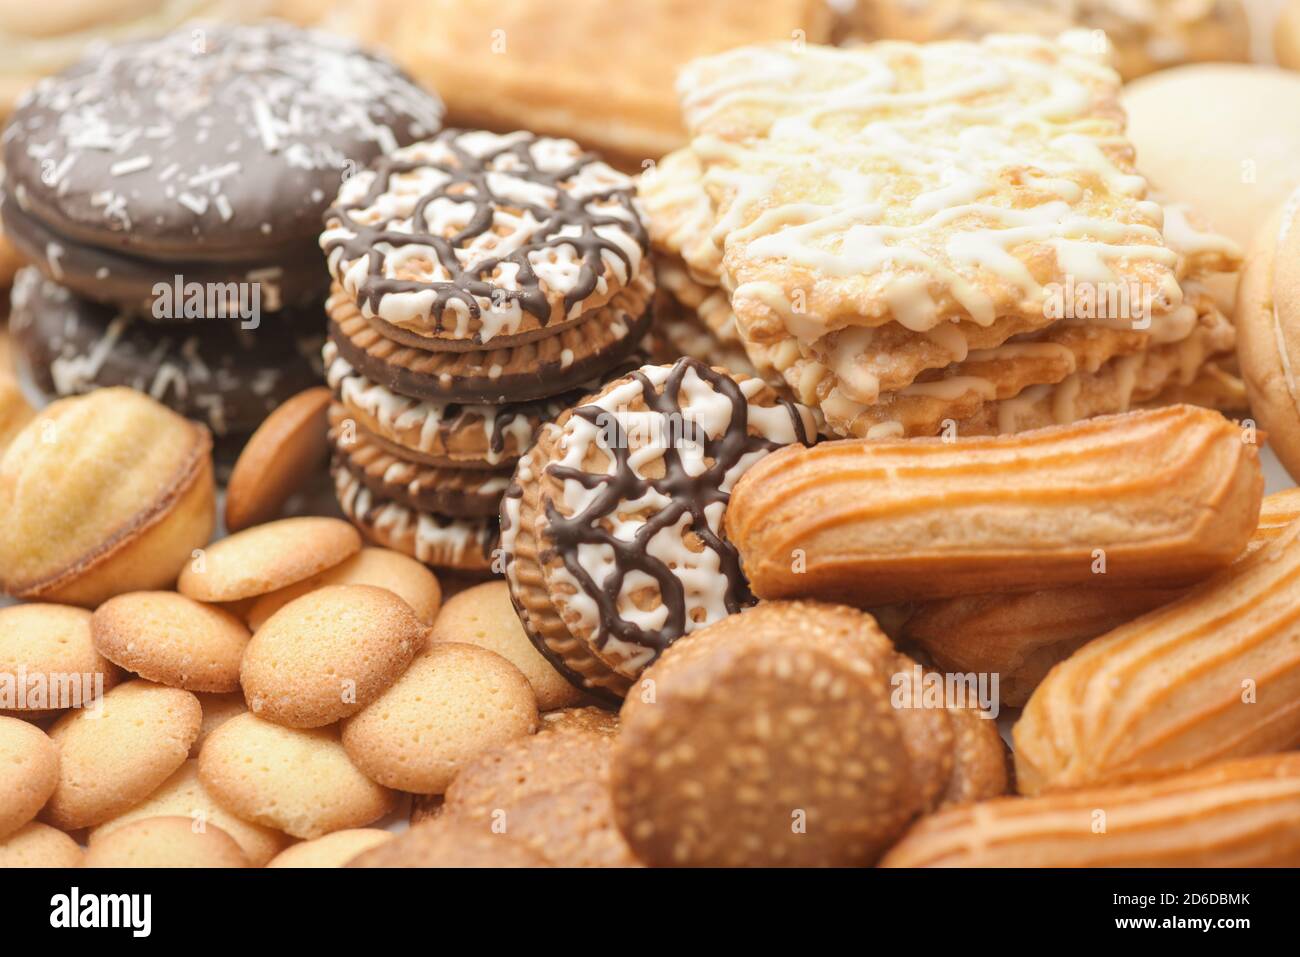 Close up of various fresh baked pastry background Stock Photo